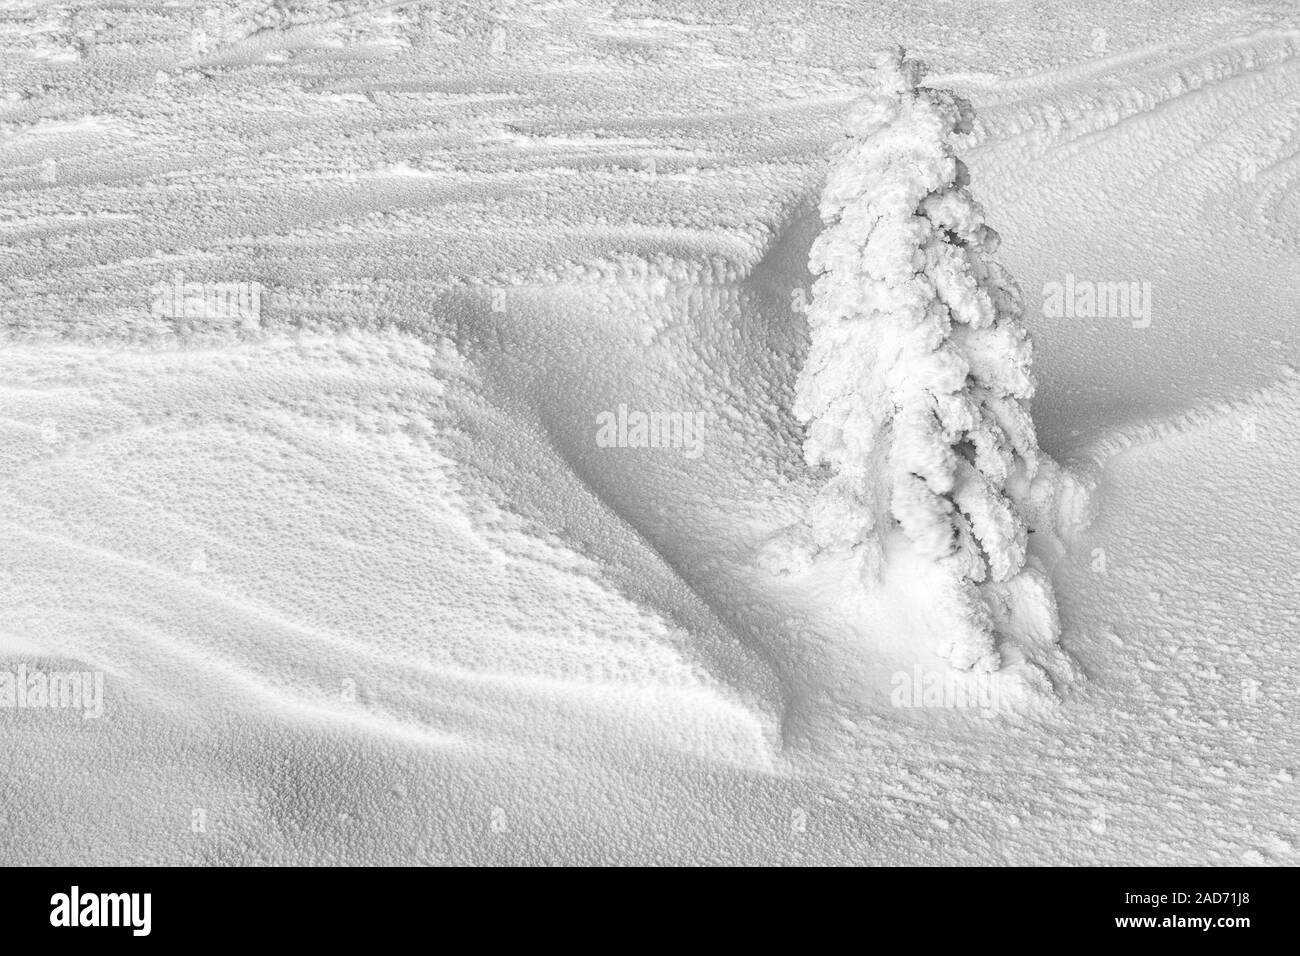 Snow covered spruce, Lapland, Sweden Stock Photo